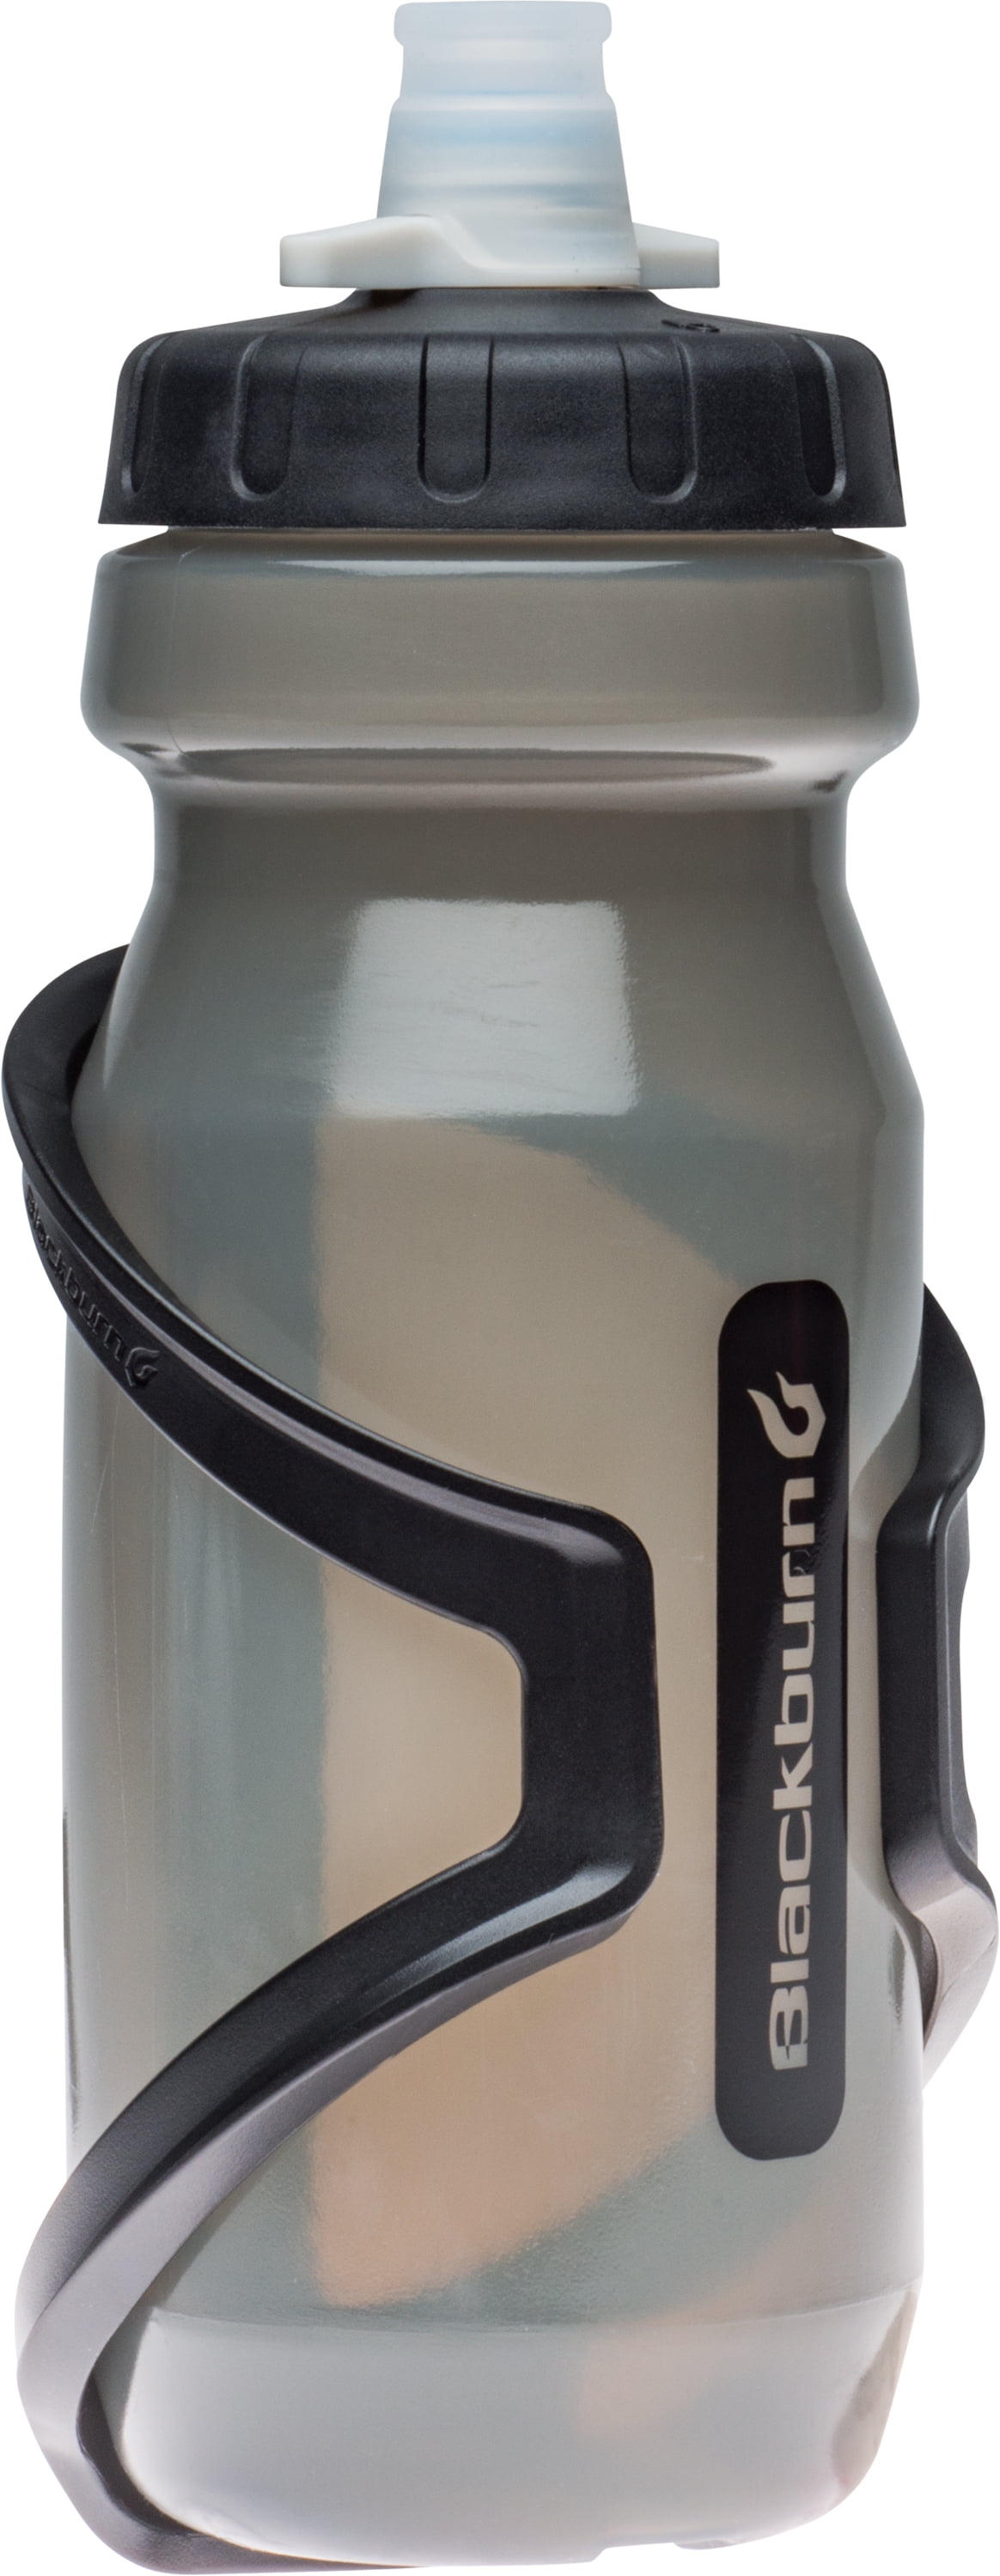 22-Oz Blackburn Valve Water Bottle w/ Cage for Bicycles $3.25 + Free Shipping w/ Walmart+ or on $35+